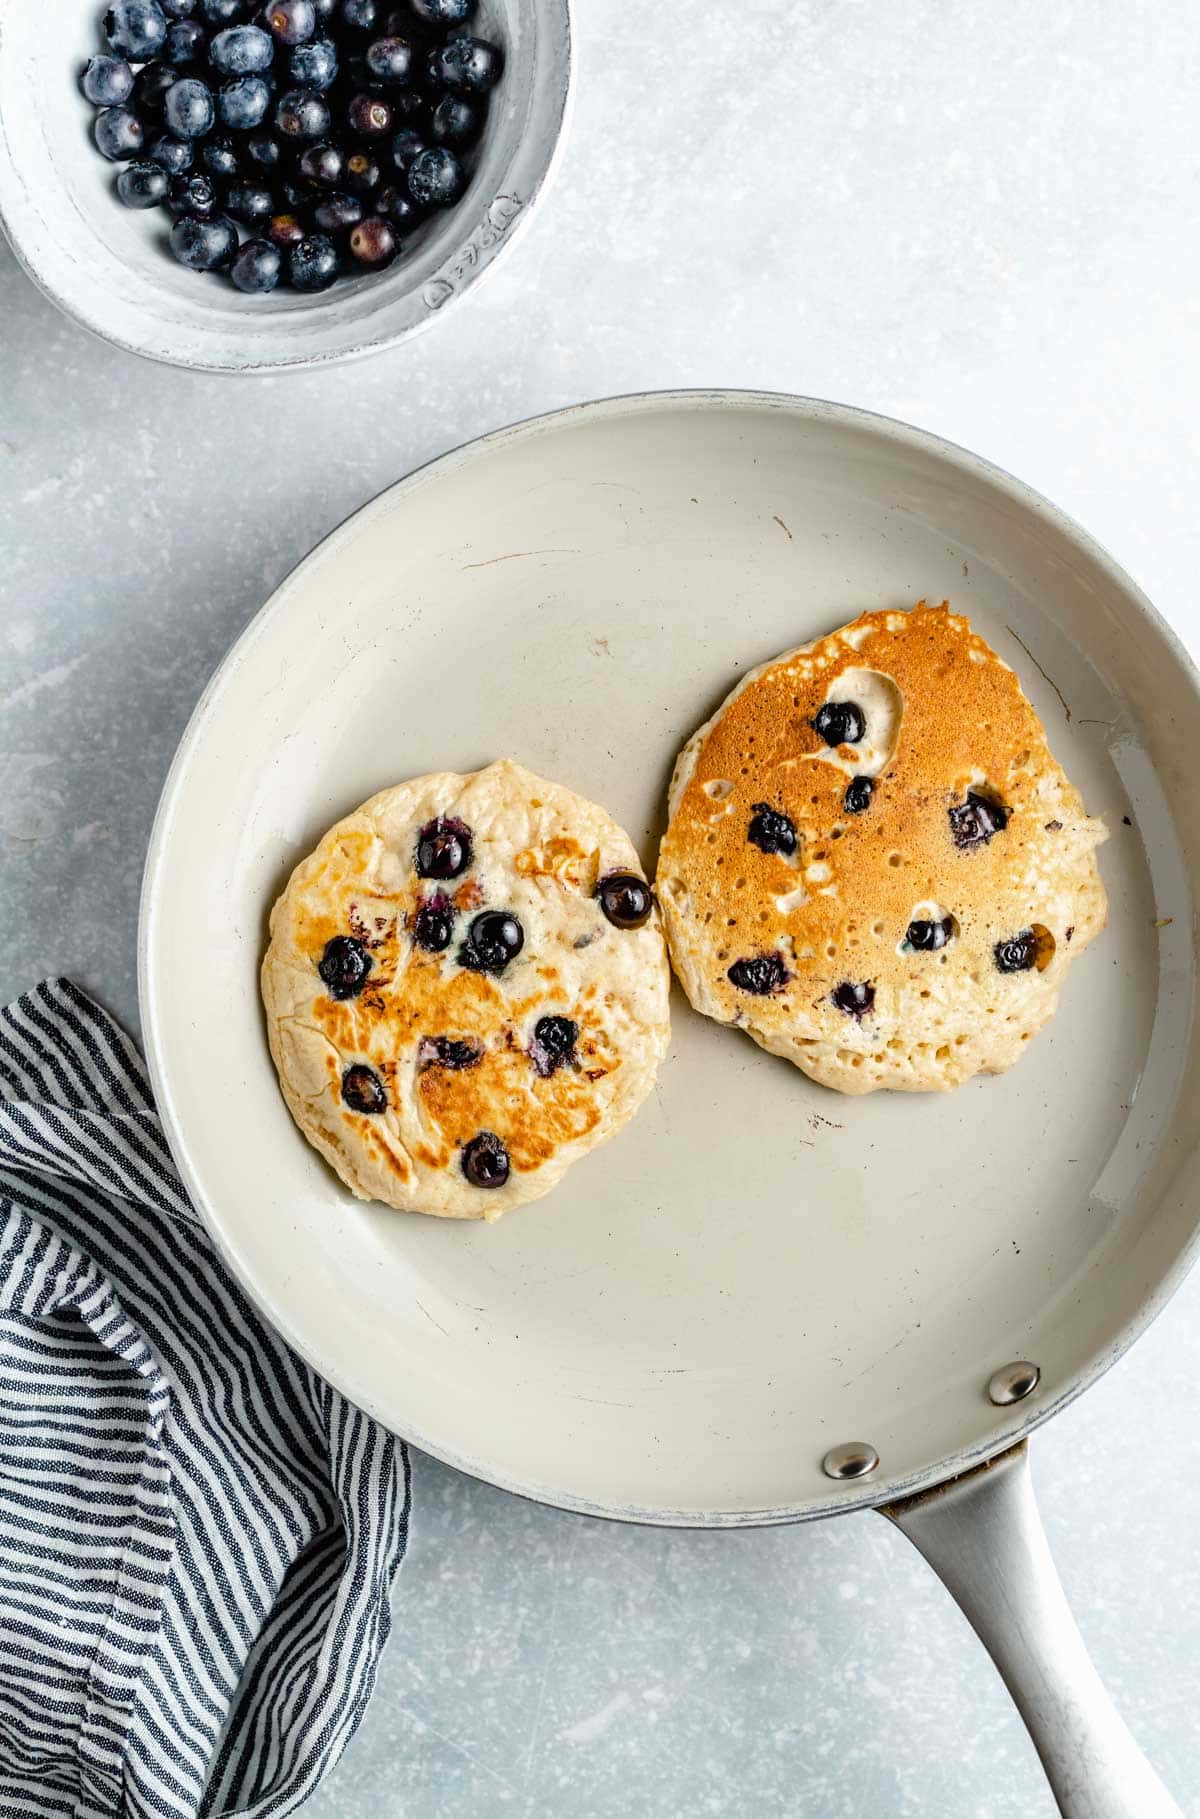 Golden brown blueberry pancakes cooking on a nonstick pan.